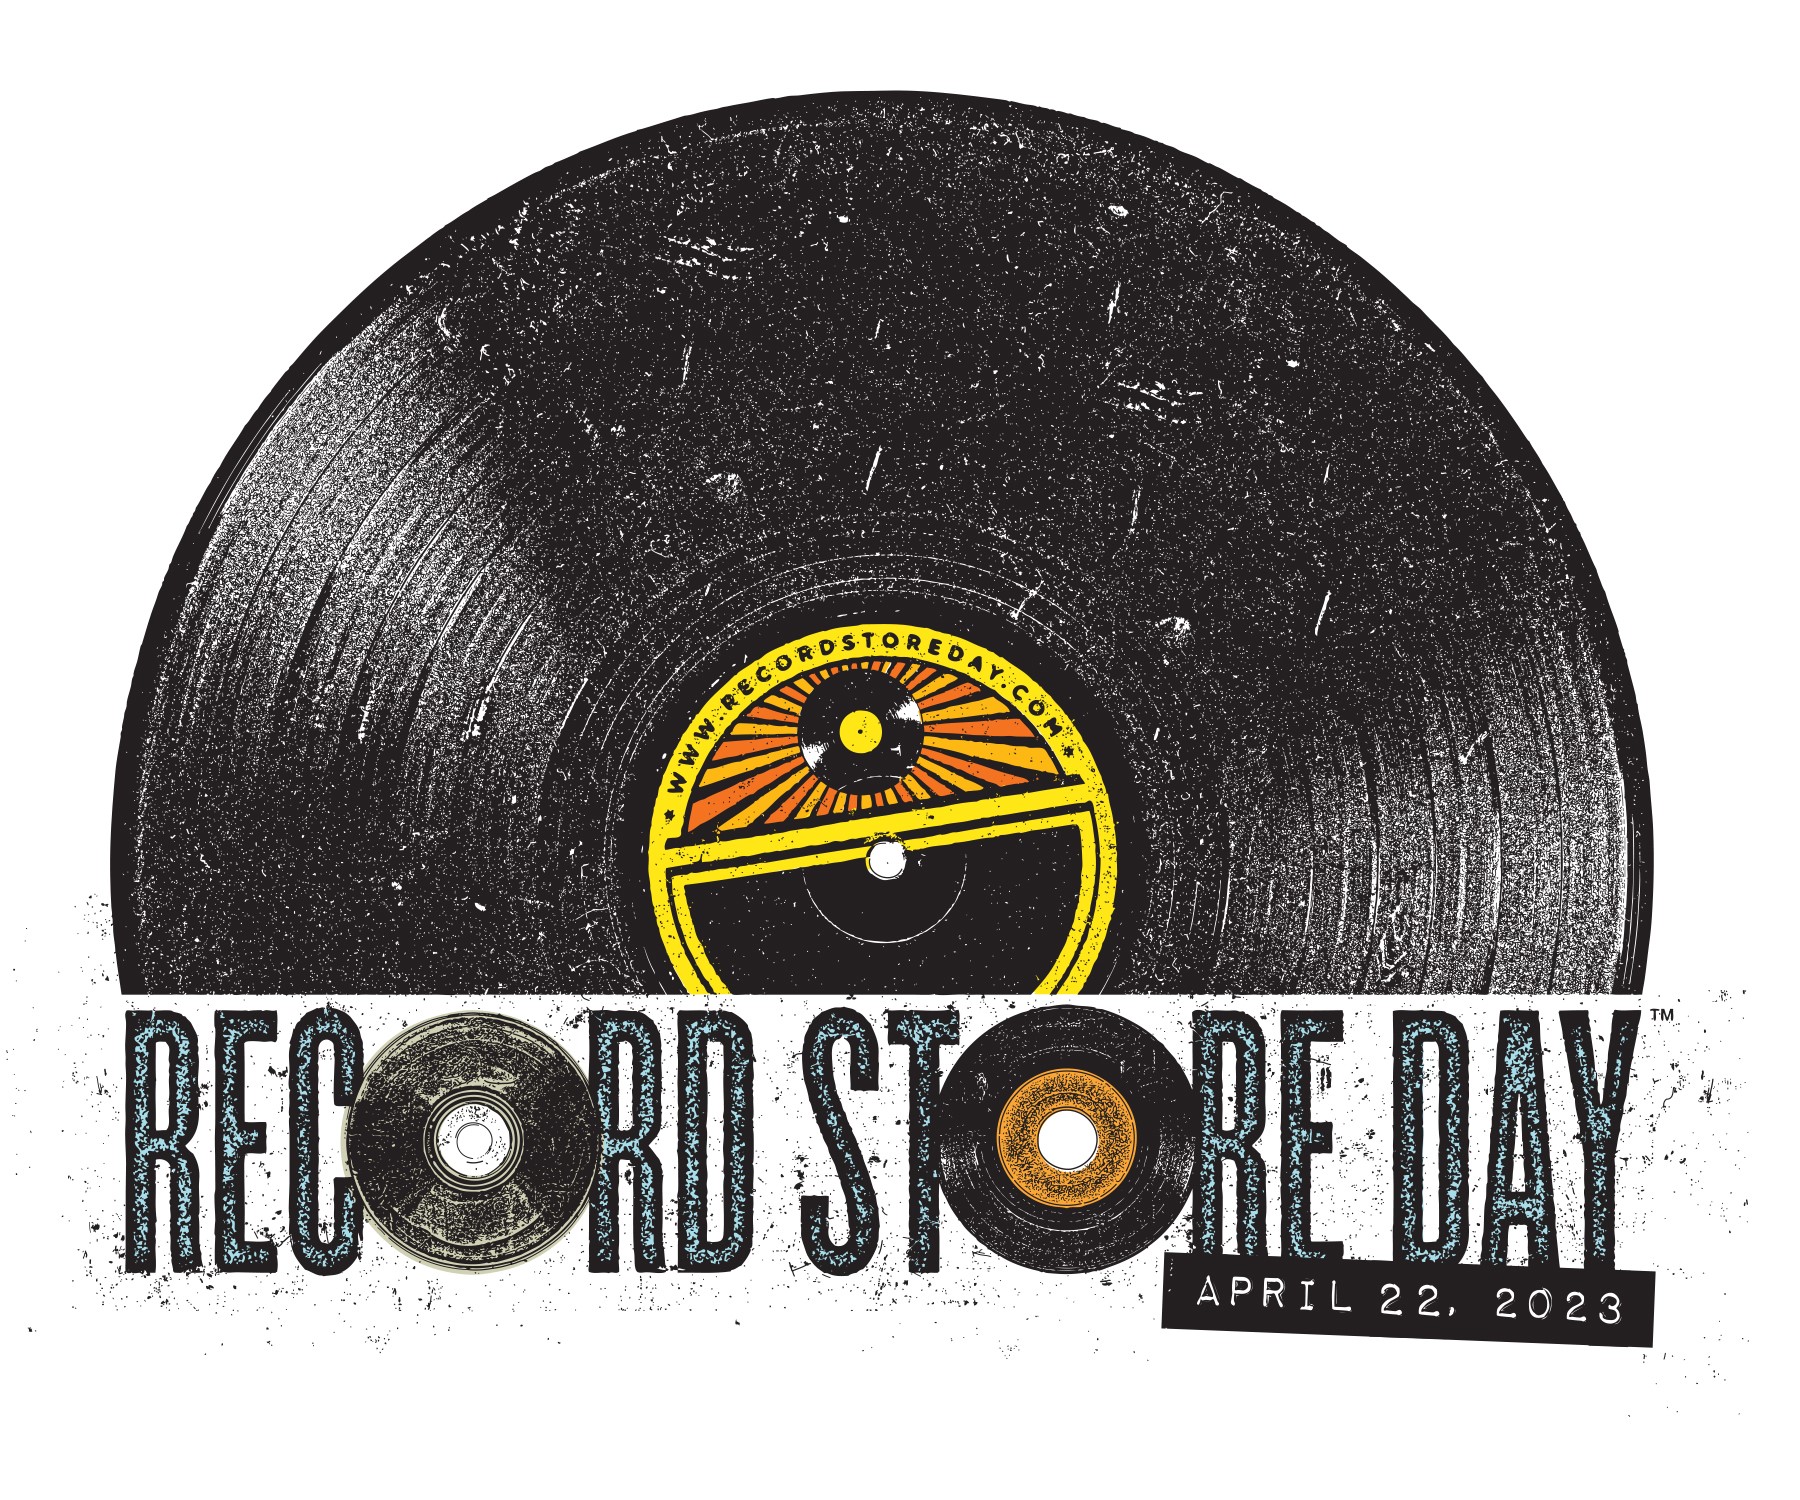 THE RECORD PUB OPENING AT 7 A.M. FOR RECORD STORE DAY 2023 ON SATURDAY, APRIL 22